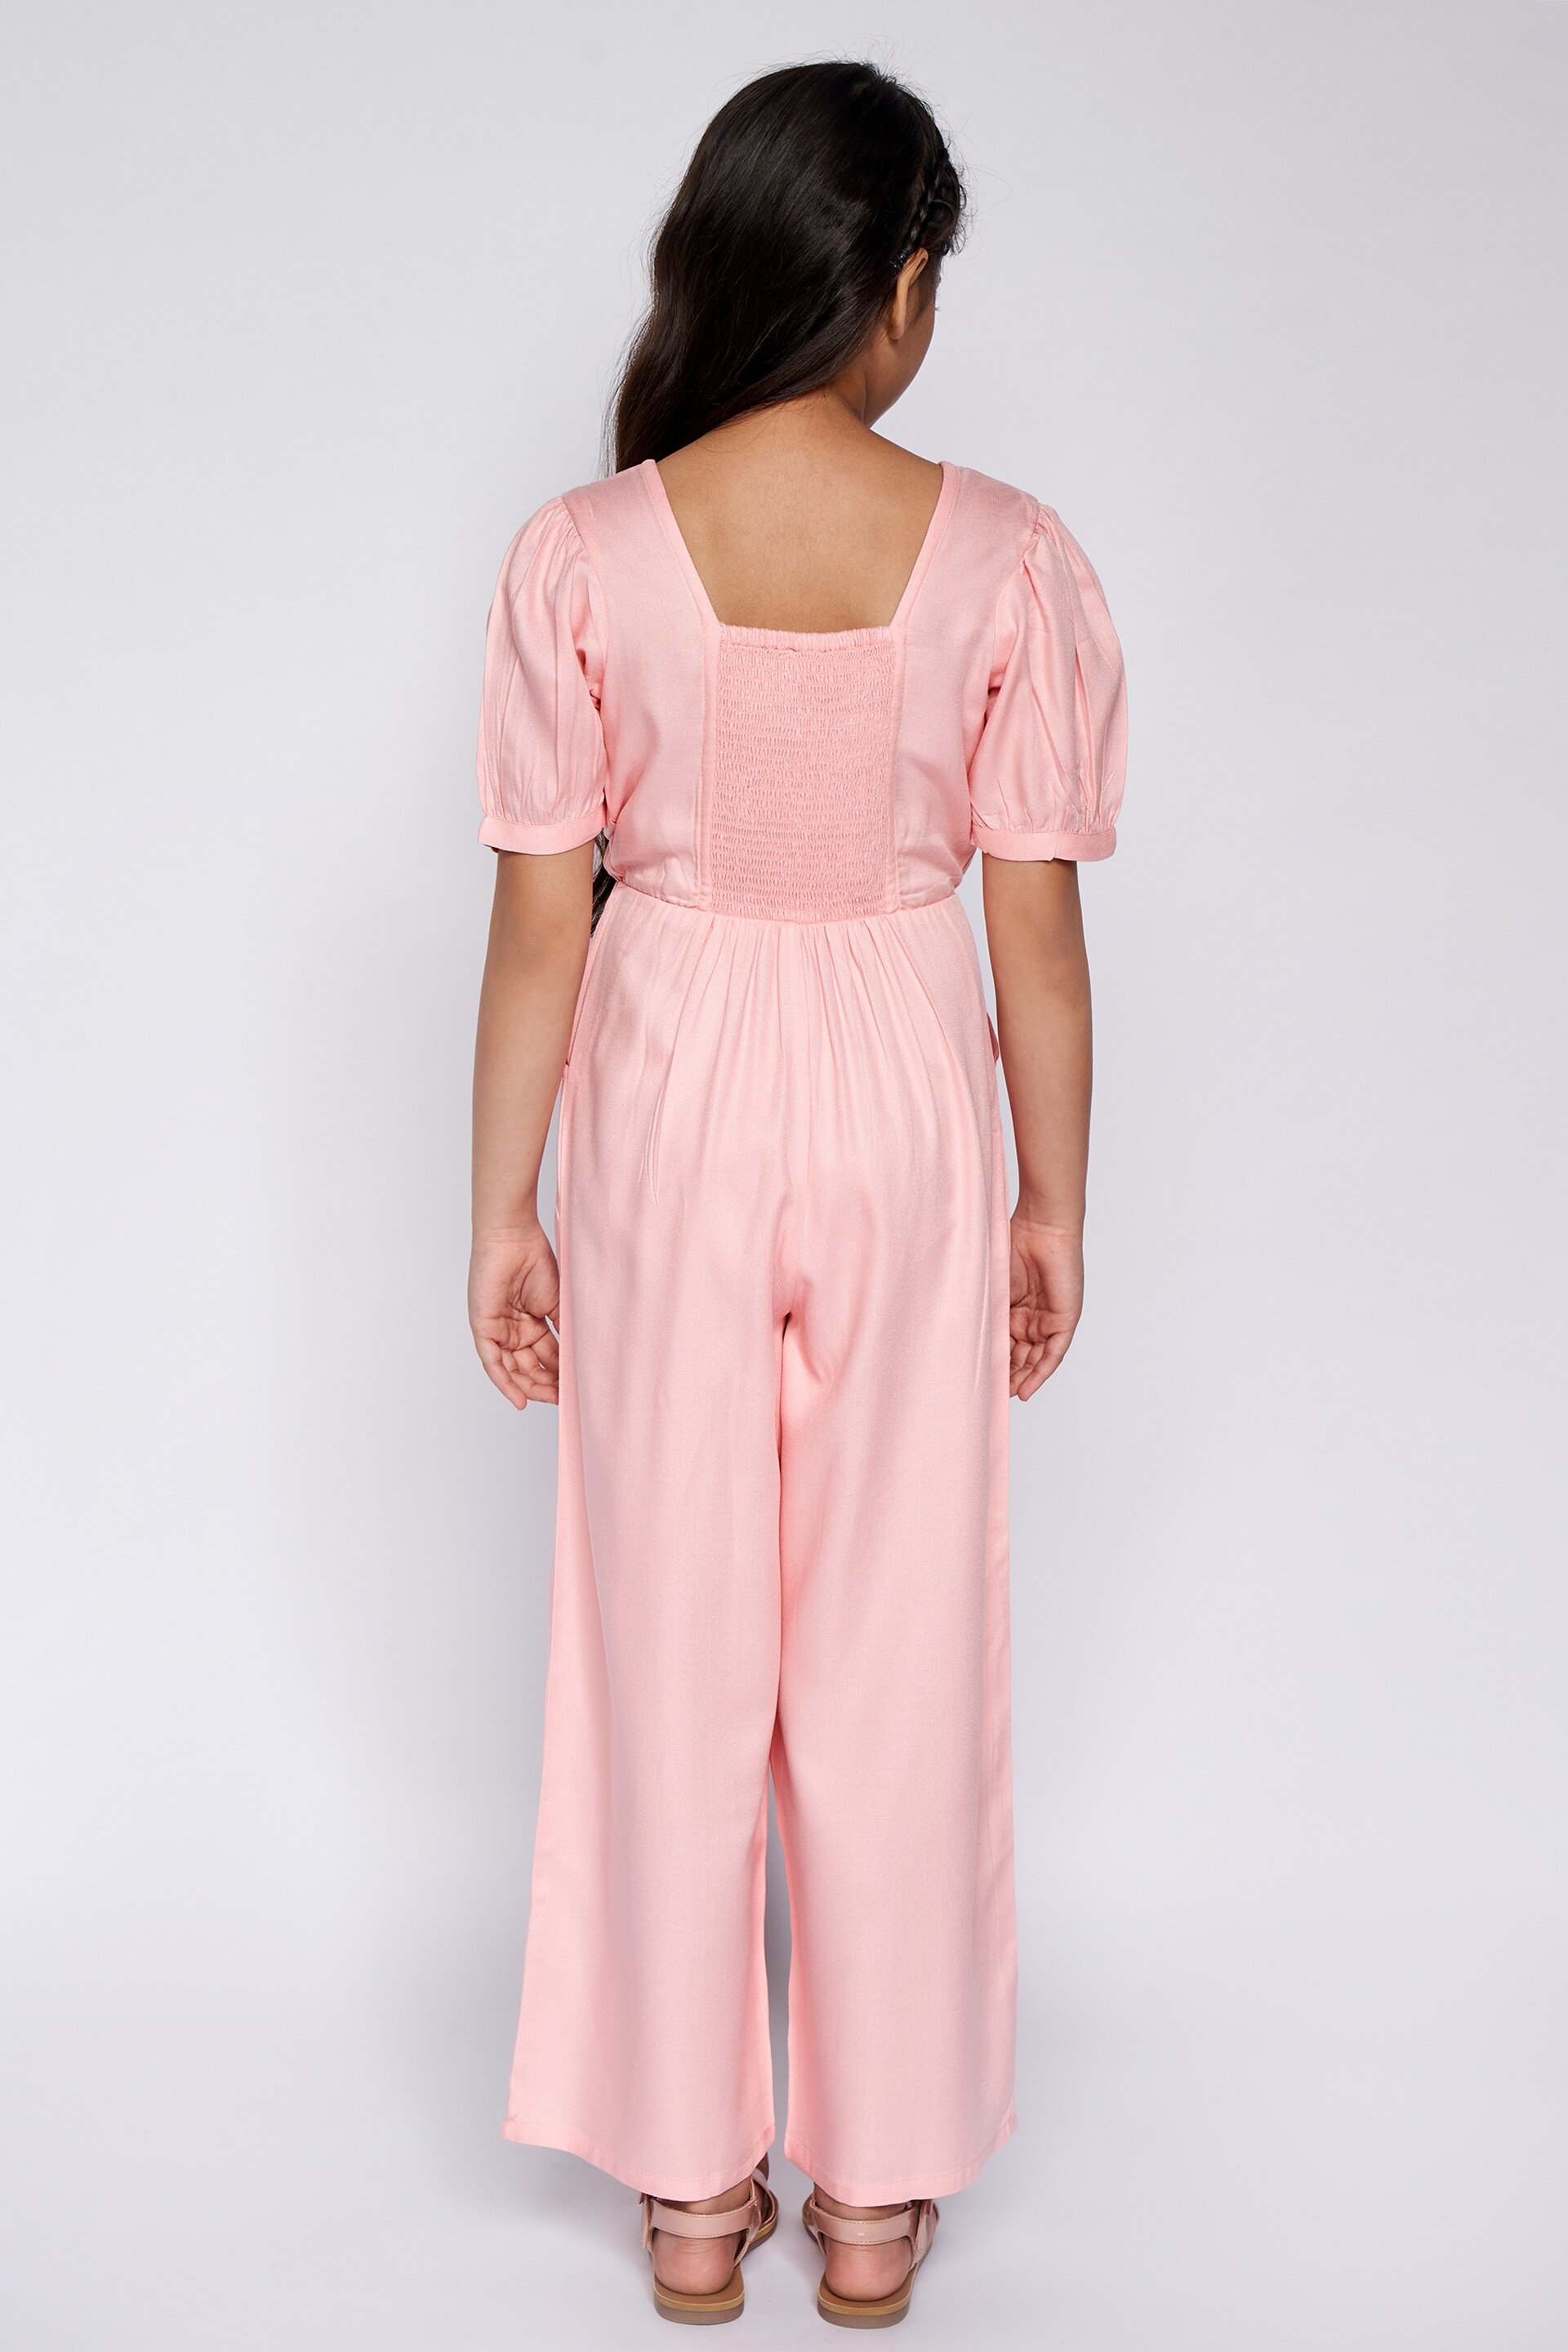 AND Pink Jump Suit